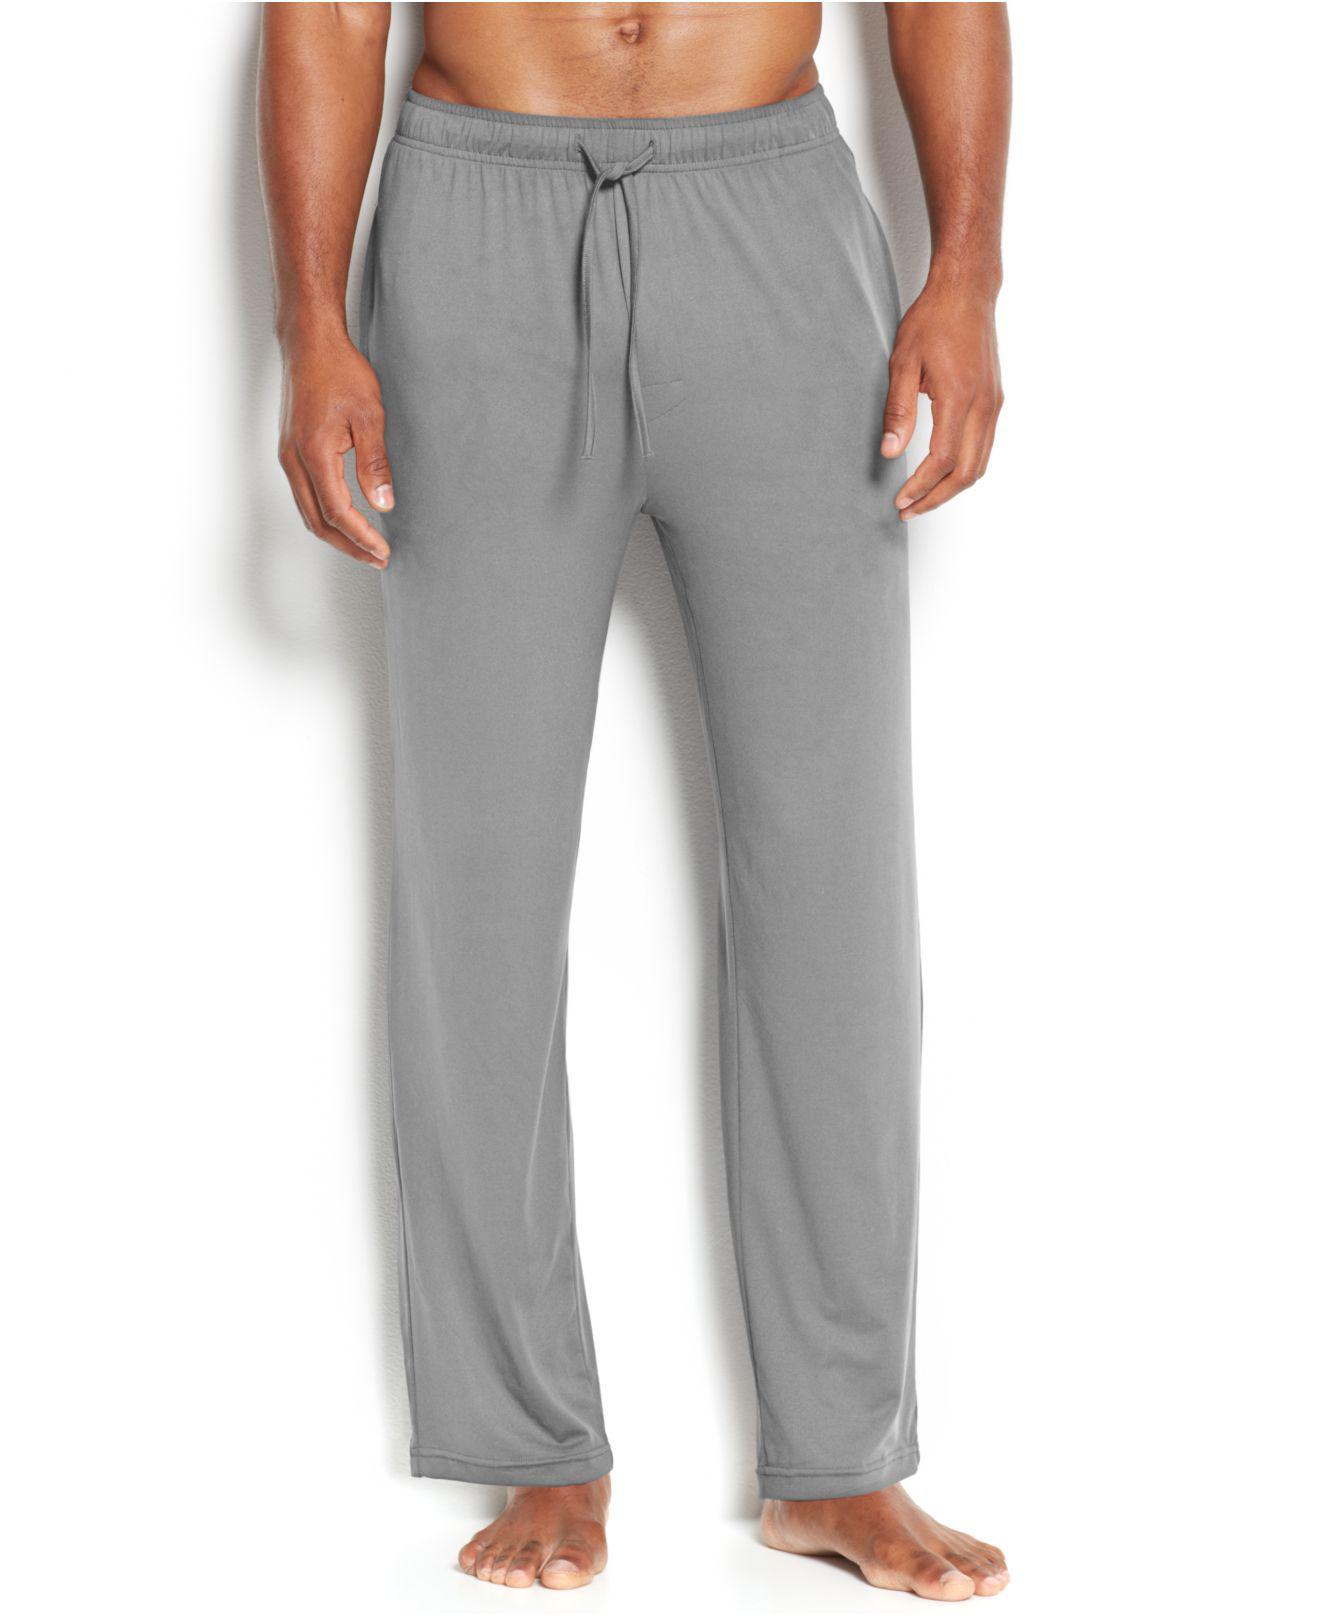 32 Degrees Synthetic Pajama Pants in Grey Heather (Gray) for Men - Lyst